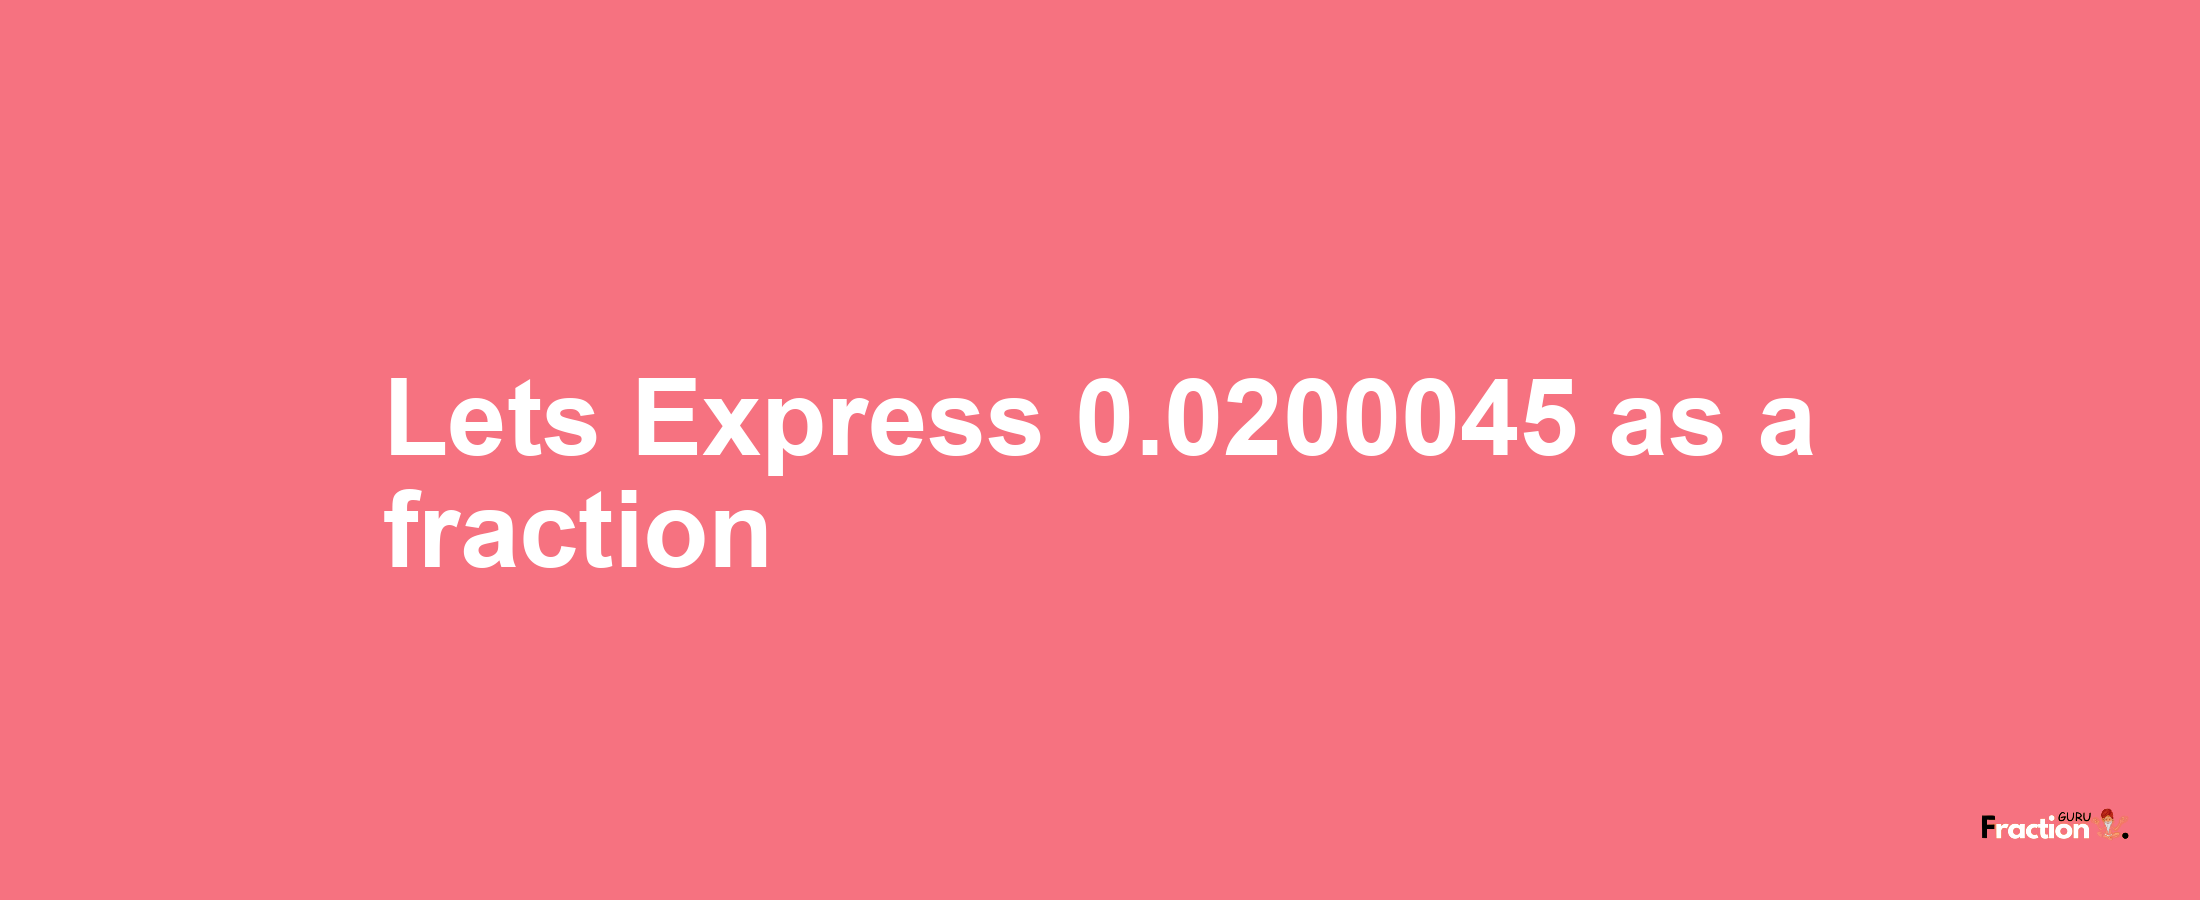 Lets Express 0.0200045 as afraction